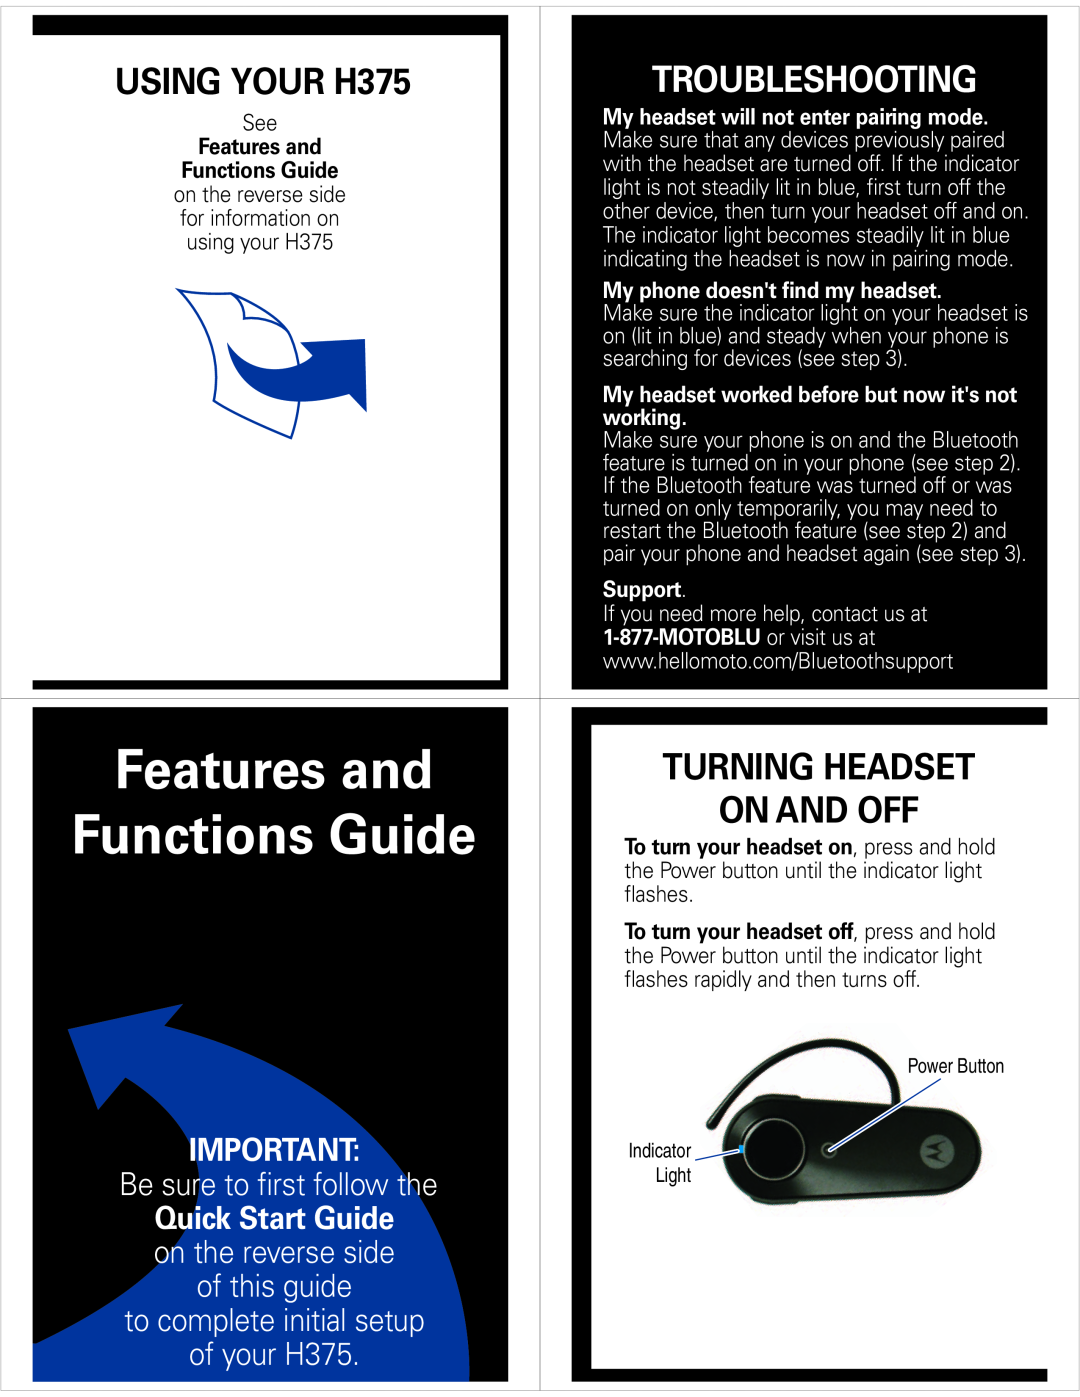 Motorola Troubleshooting, USING YOUR H375, On And Off, Turning Headset, Features and, Functions Guide, of this guide 